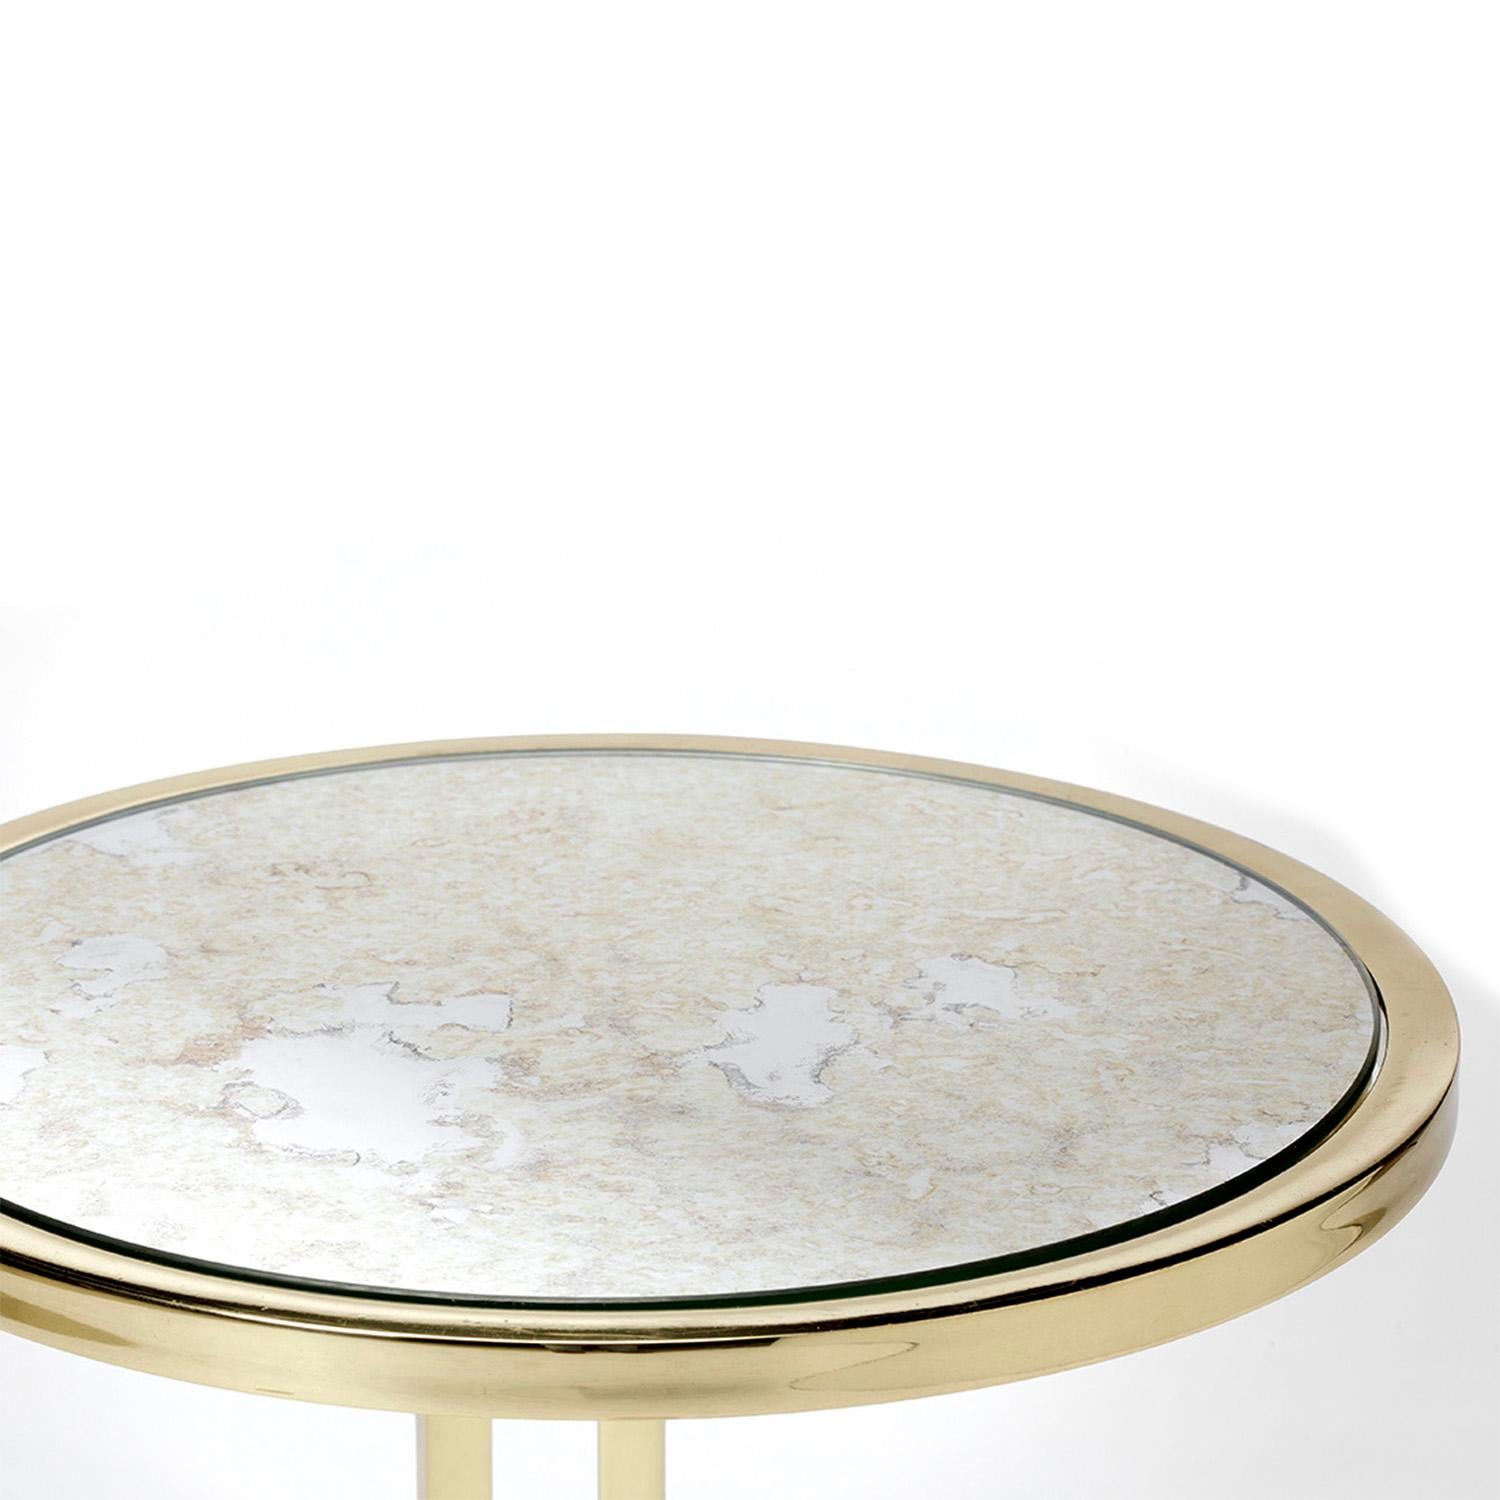 Julia Side Table, Polished Brass and Antique Mirror, Handcrafted by Duistt

The JULIA side table is an eye-catching and elegant piece with a polished brass structure and antique mirror tops, making it the perfect side or accent table in any room.